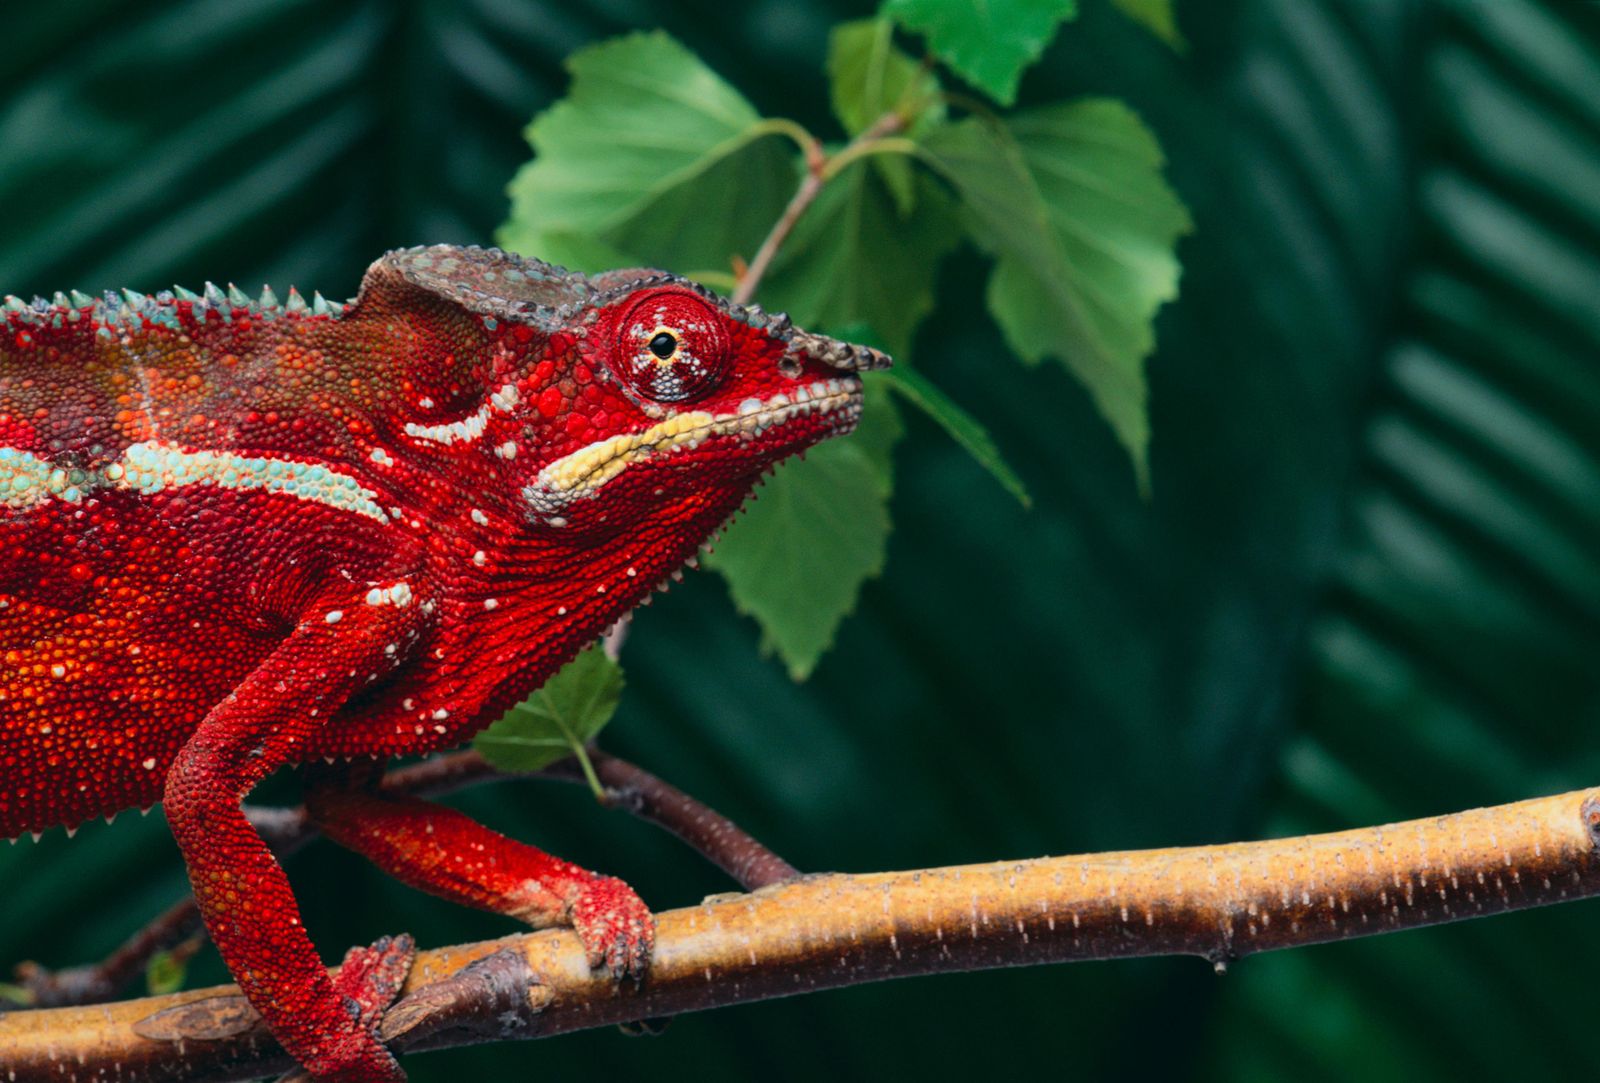 Chameleons don't change colour, they use smart mirrors